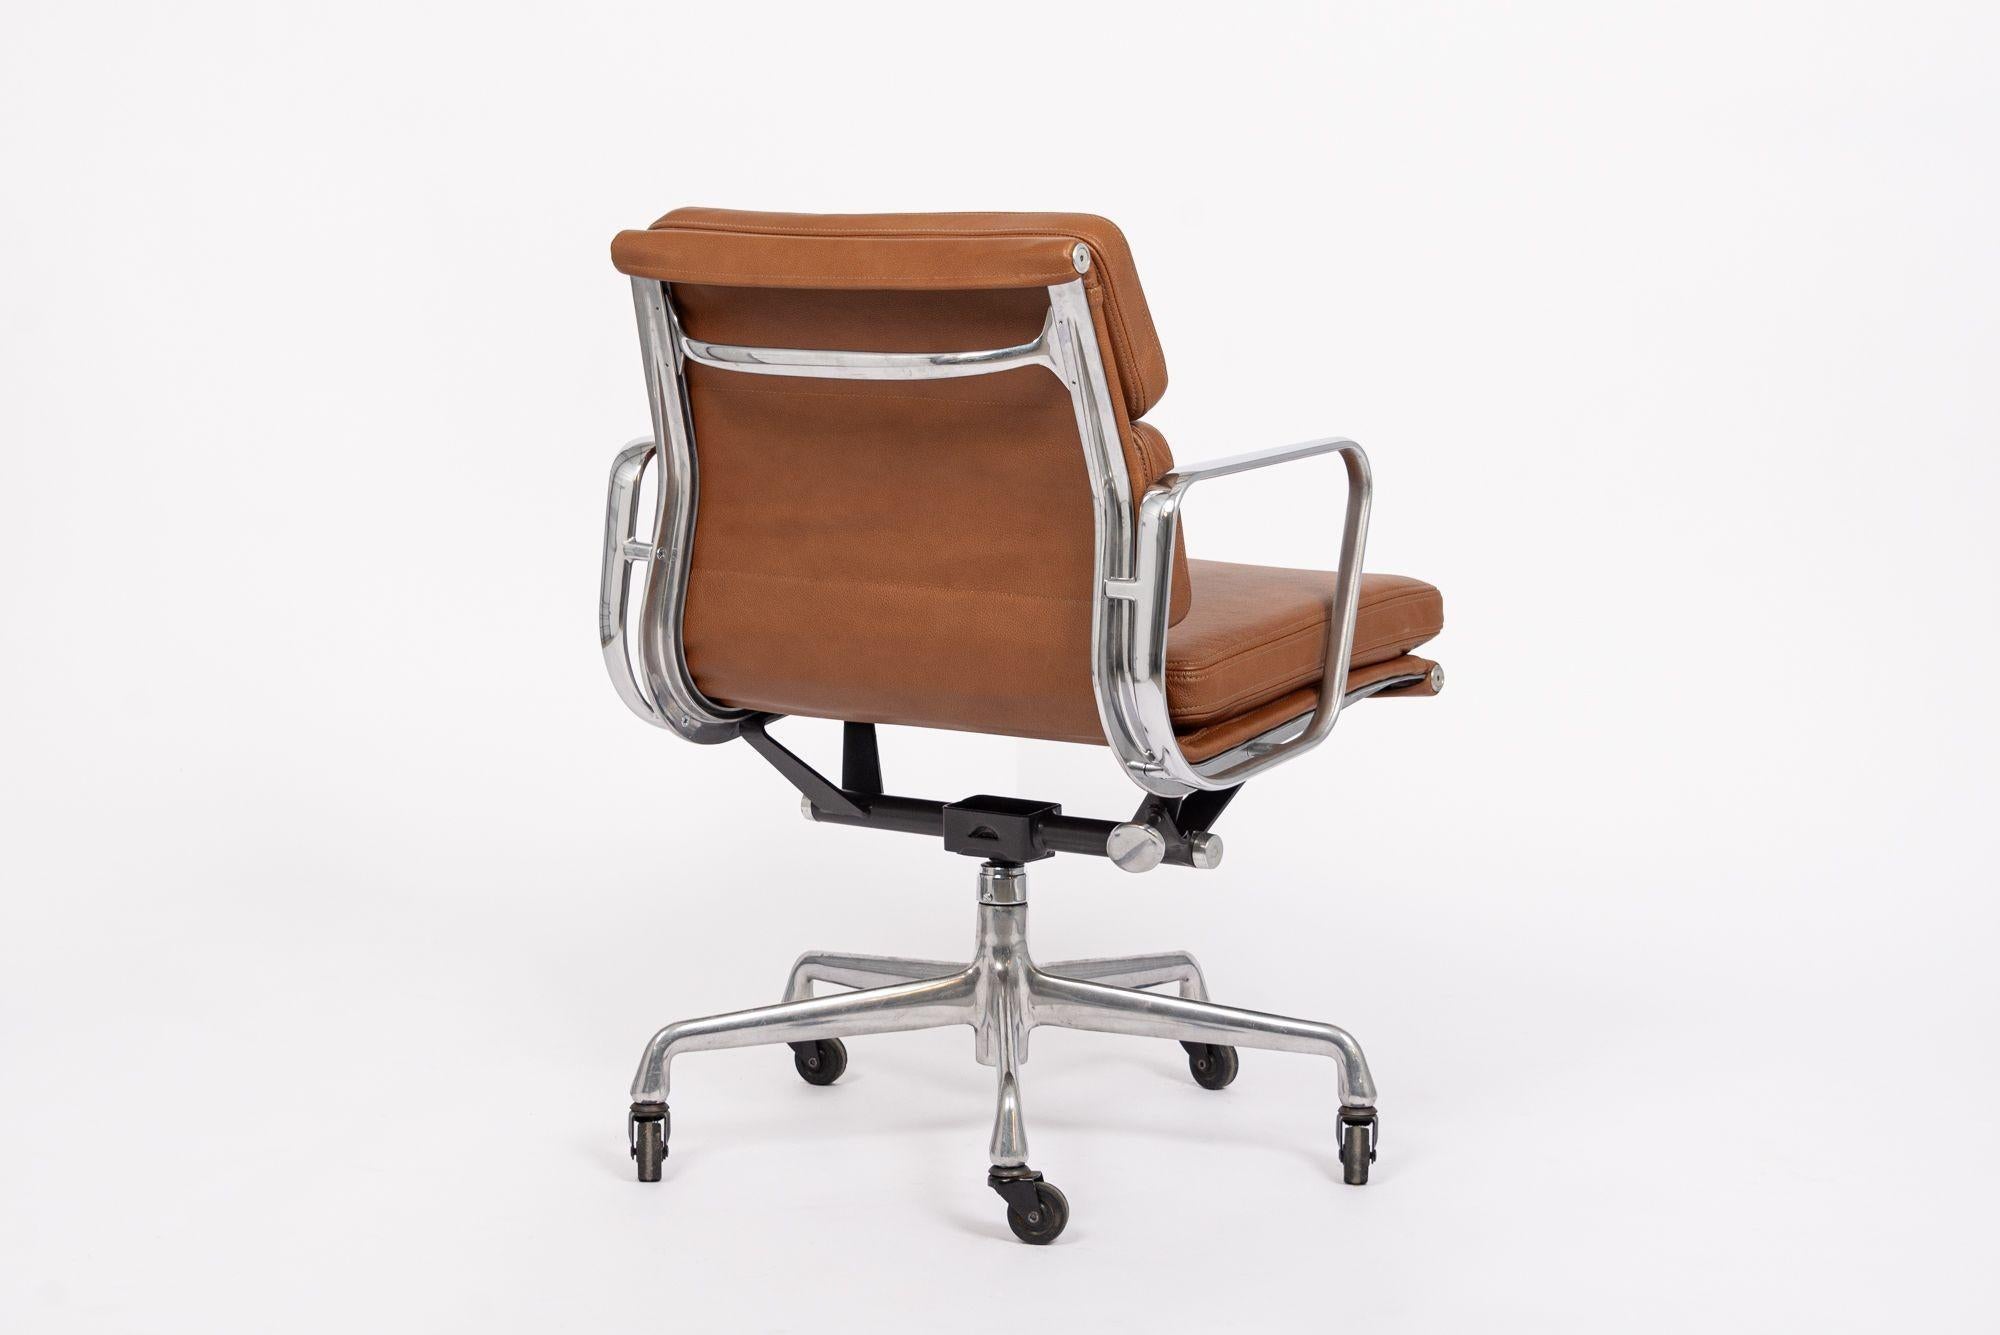 American Mid Century Brown Leather Office Chair by Eames for Herman Miller 2000s For Sale